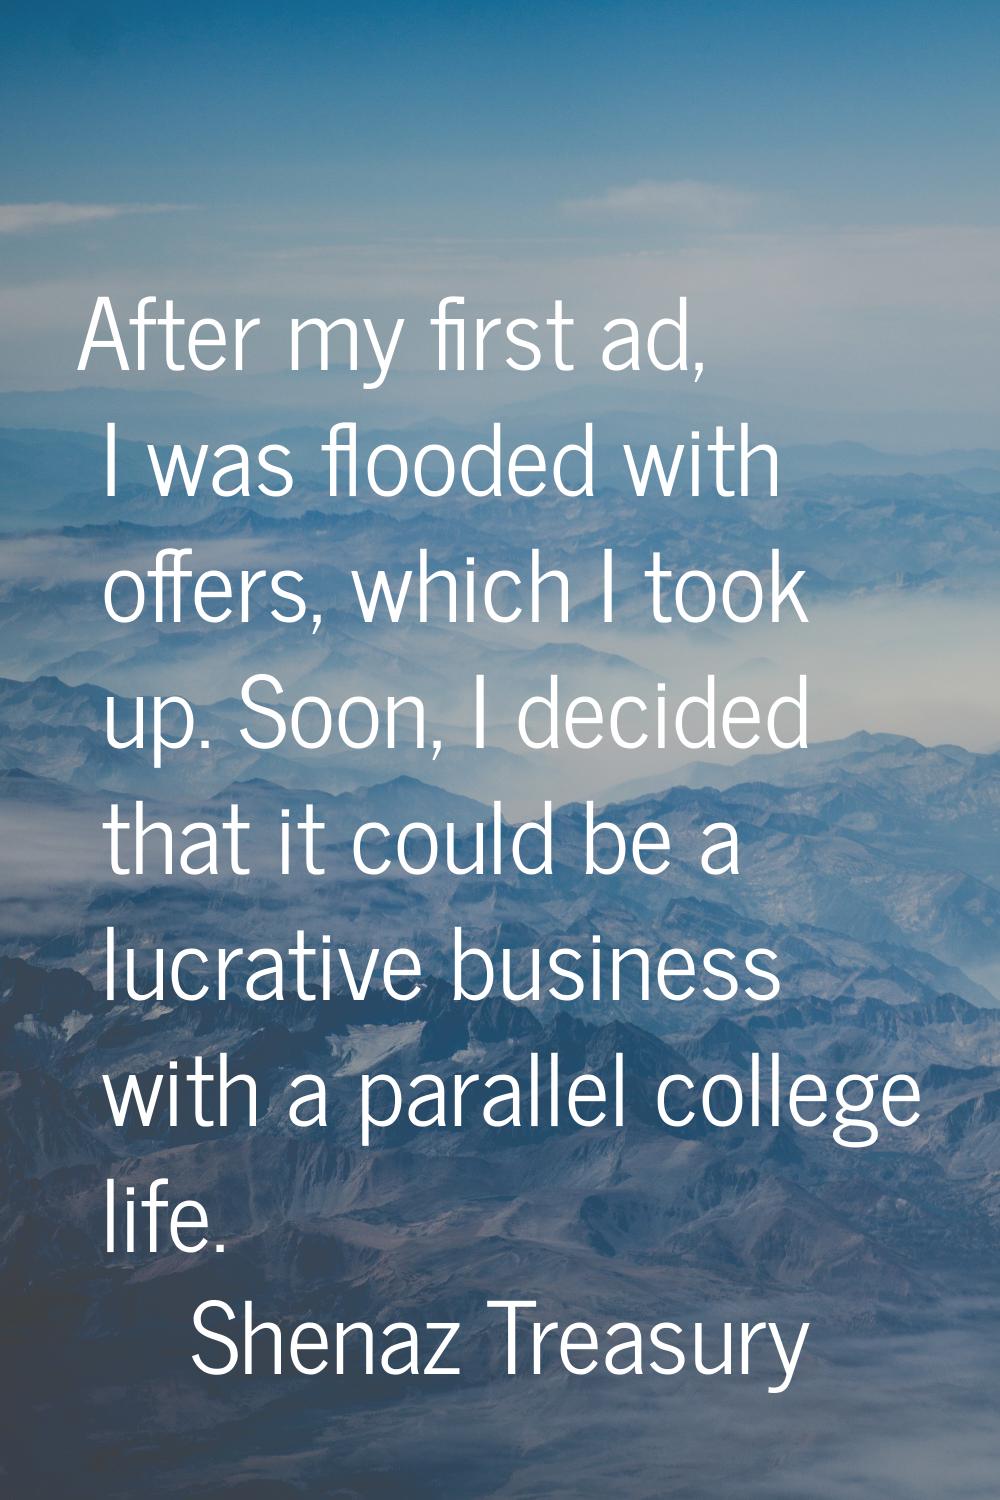 After my first ad, I was flooded with offers, which I took up. Soon, I decided that it could be a l